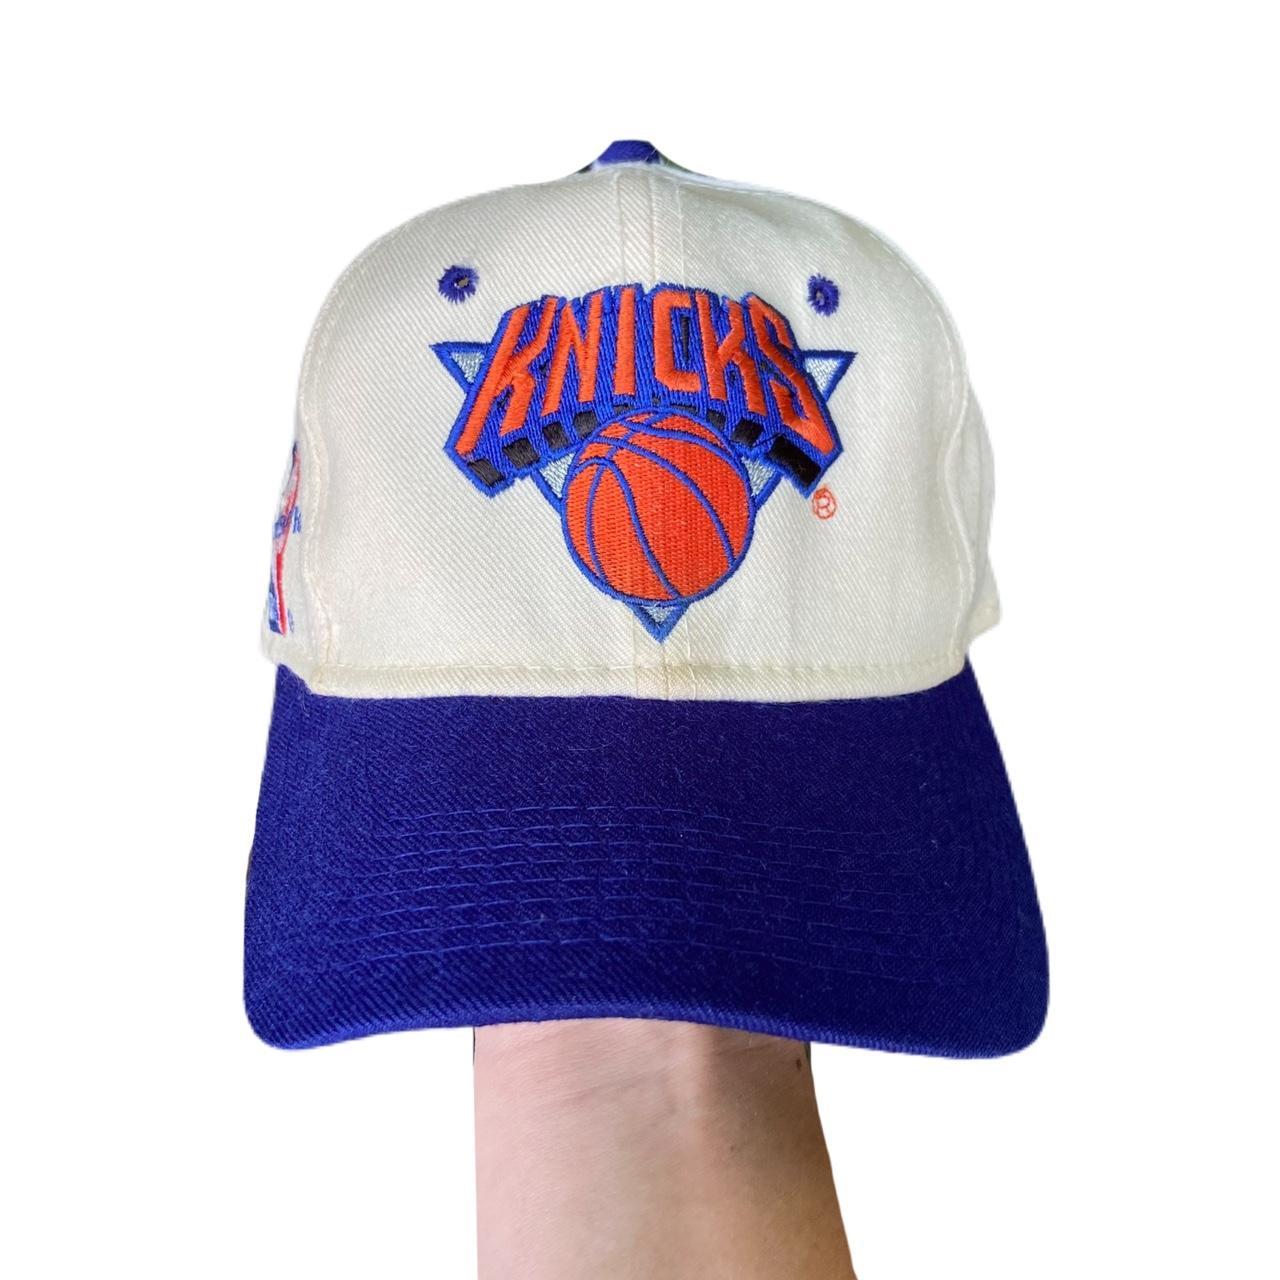 Vintage 90s New York Knicks Sports Specialties Fitted Hat Size 7 and 1/8 